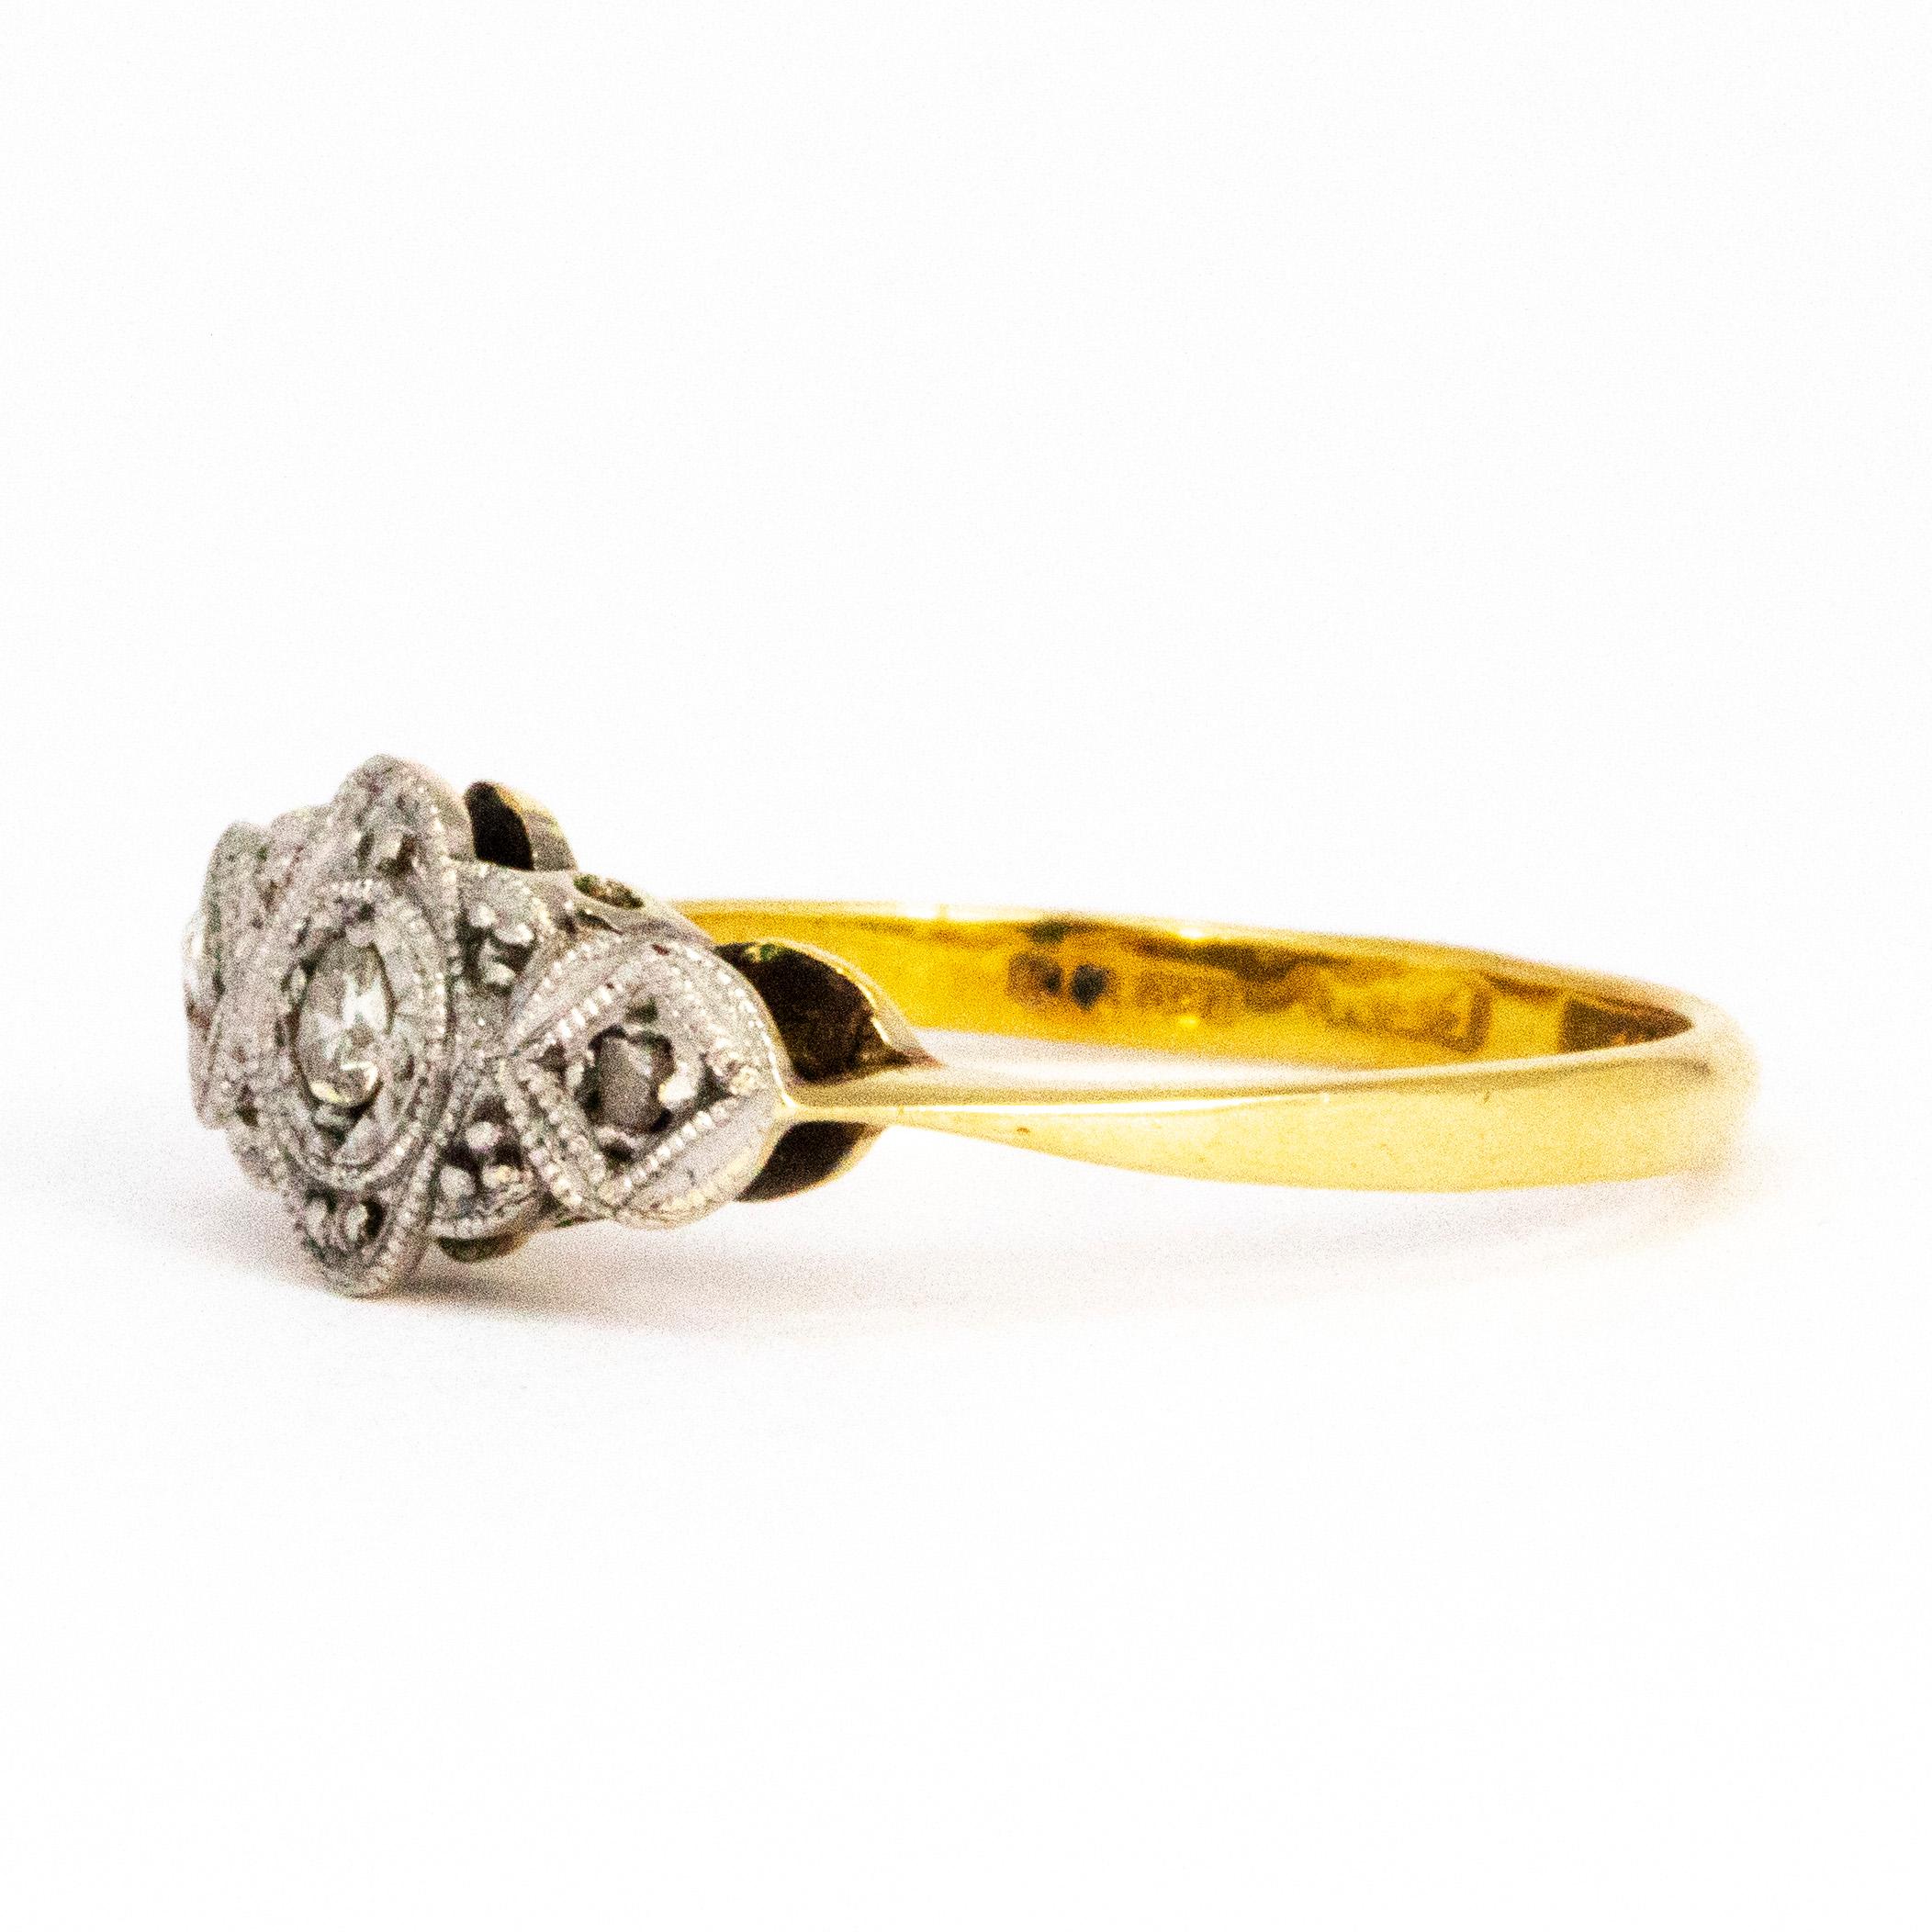 This gorgeous vintage ring has a real art deco feel to it because of the shapes and settings used. The centre diamond measures 7pts and the two outer diamonds measure 3pts each. The stones are all set in detailed platinum and the ring itself is